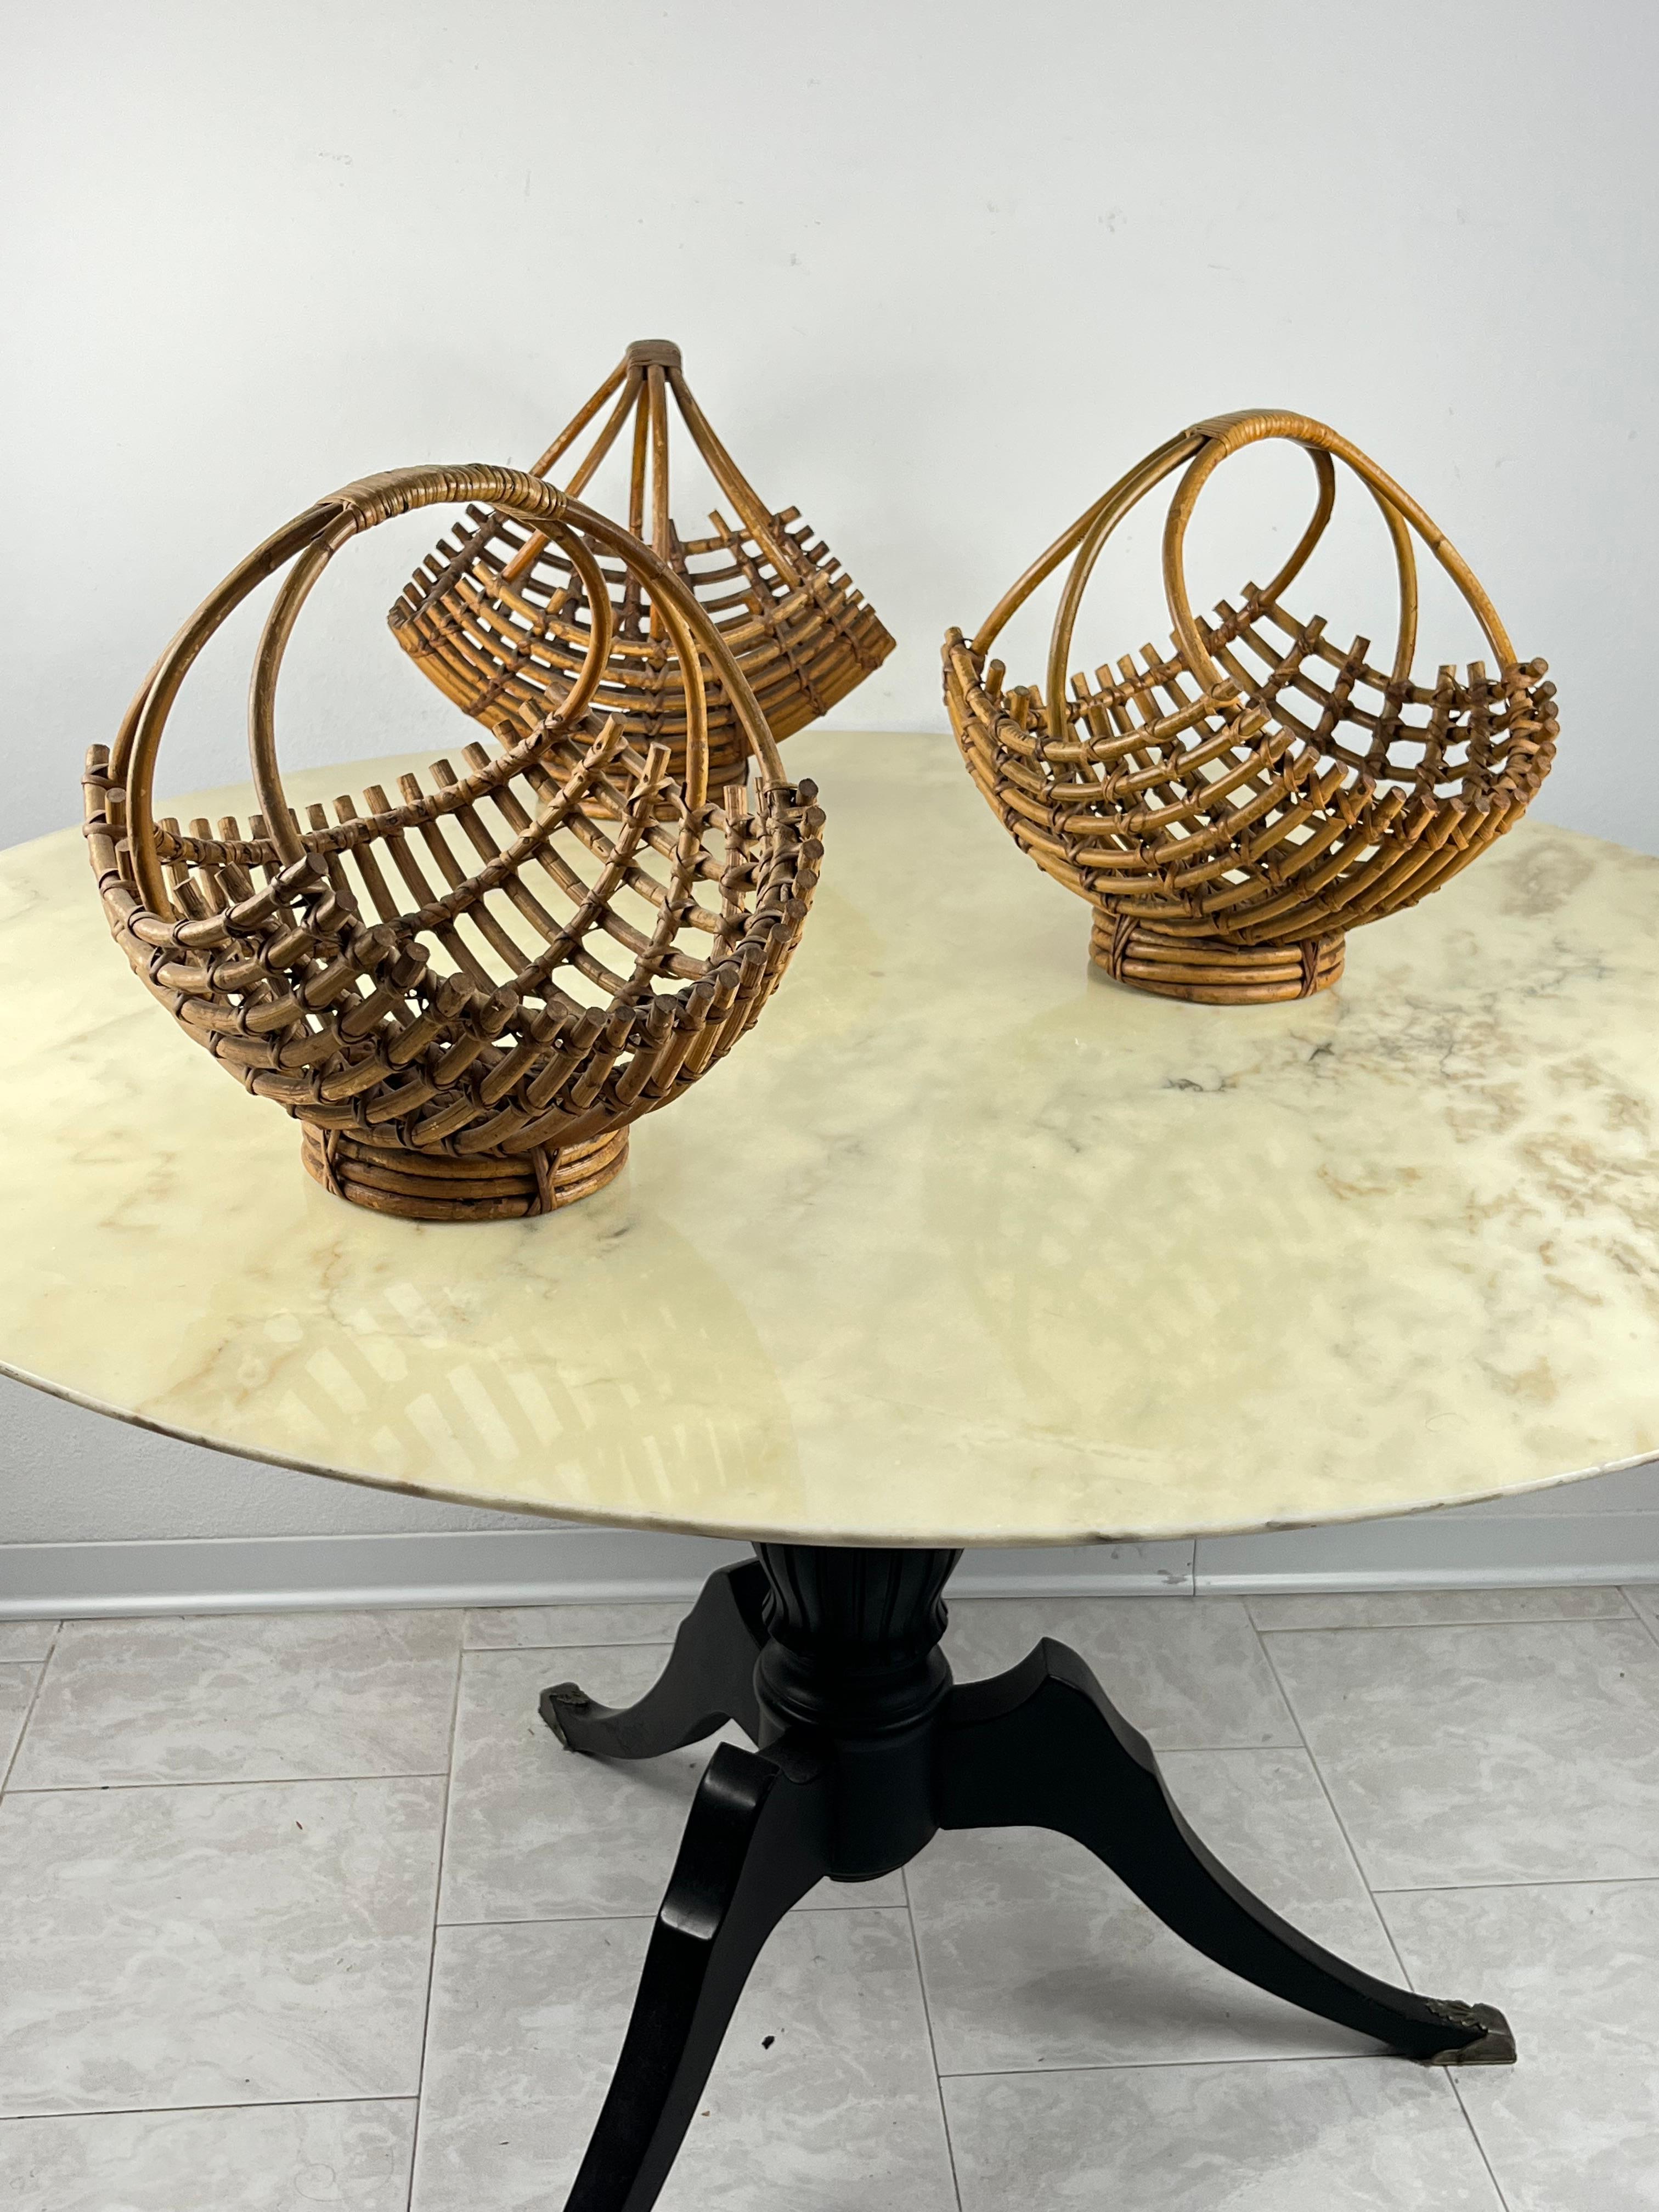 Set of 3 bamboo baskets, Italy, 1960s
Found in a villa in a well-known Sicilian seaside resort, Taormina.
They are in good condition, small signs of aging.